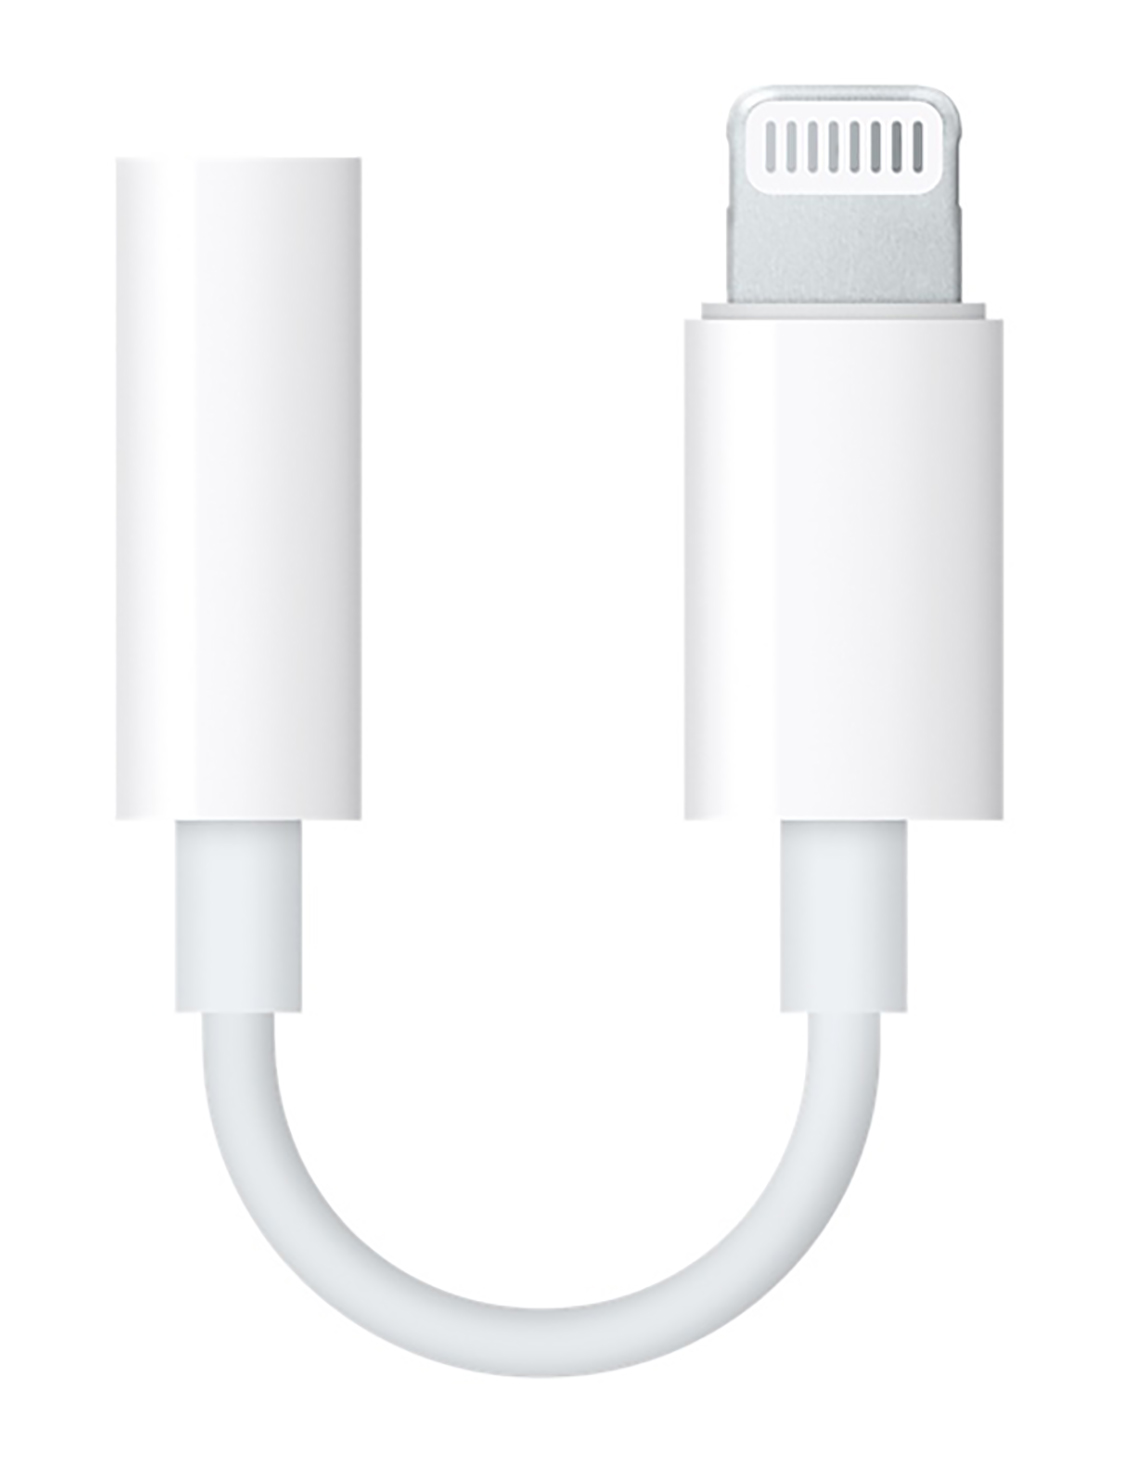 Apple Lightning to 3.5 mm Headphone Jack Adapter - White (MMX62AM/A) - image 2 of 3